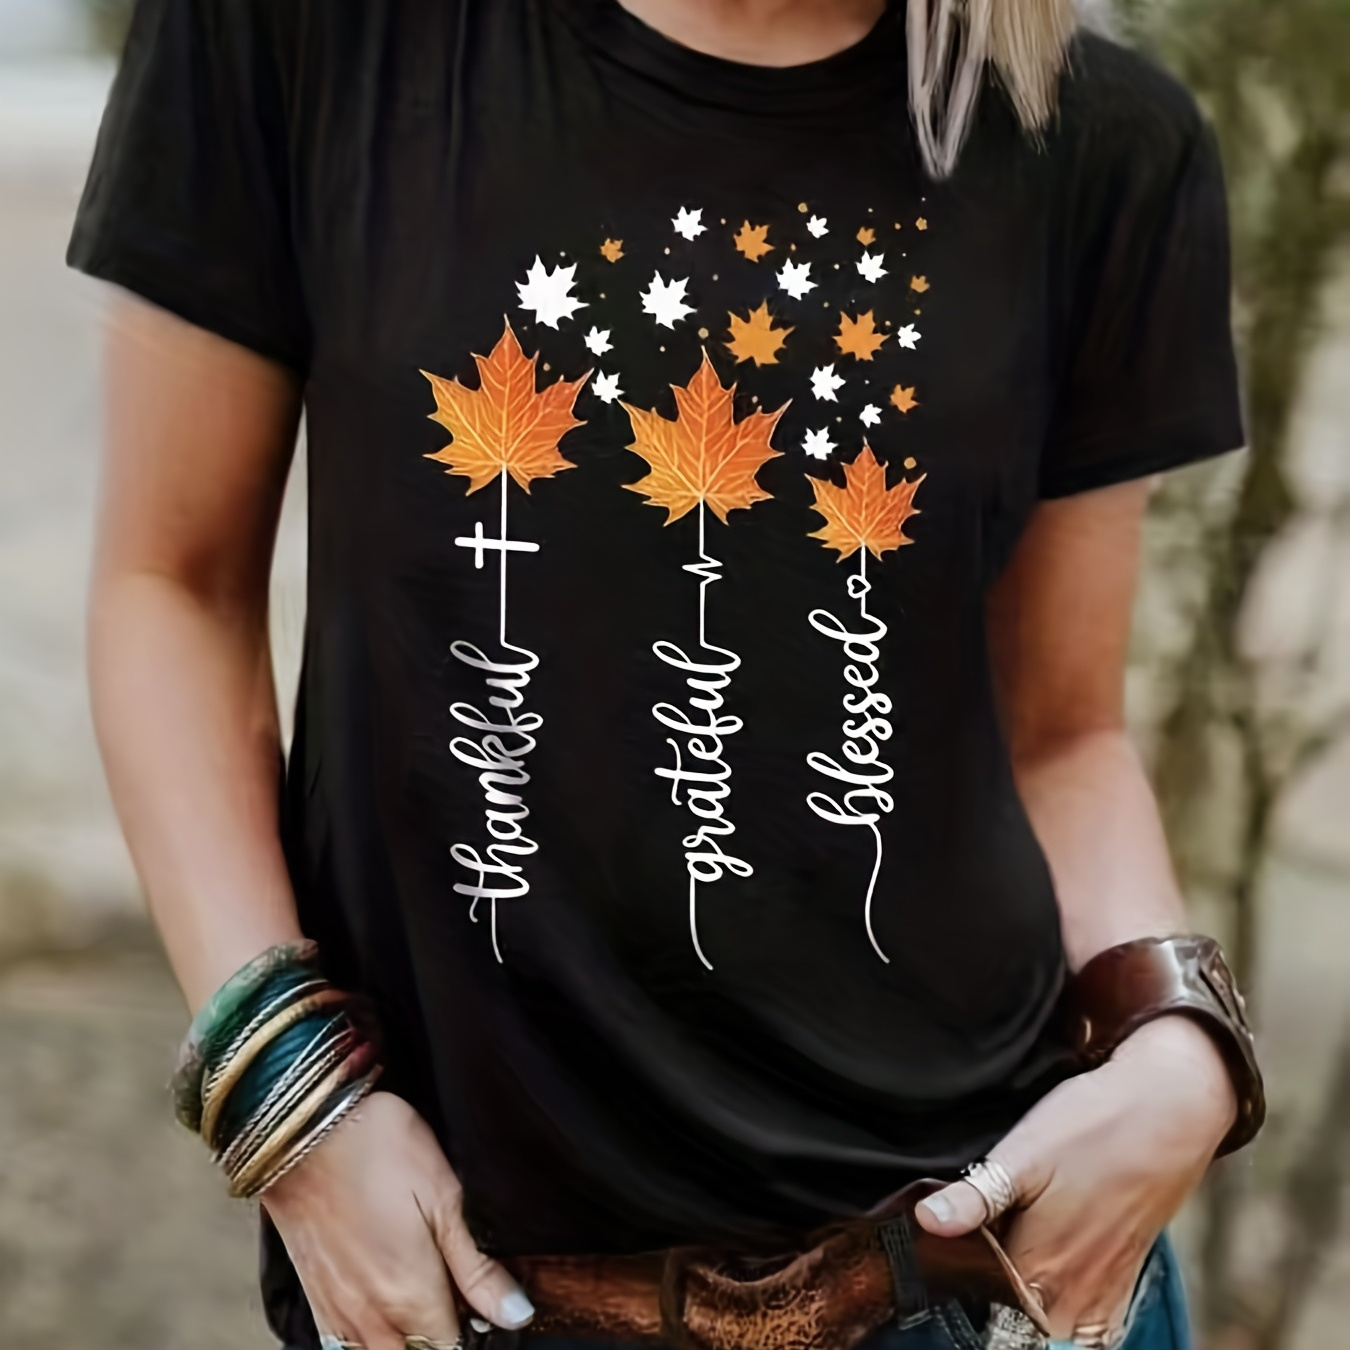 

Maple Leaf & Letter Print Crew Neck T-shirt, Casual Short Sleeve Top For Spring & Summer, Women's Clothing